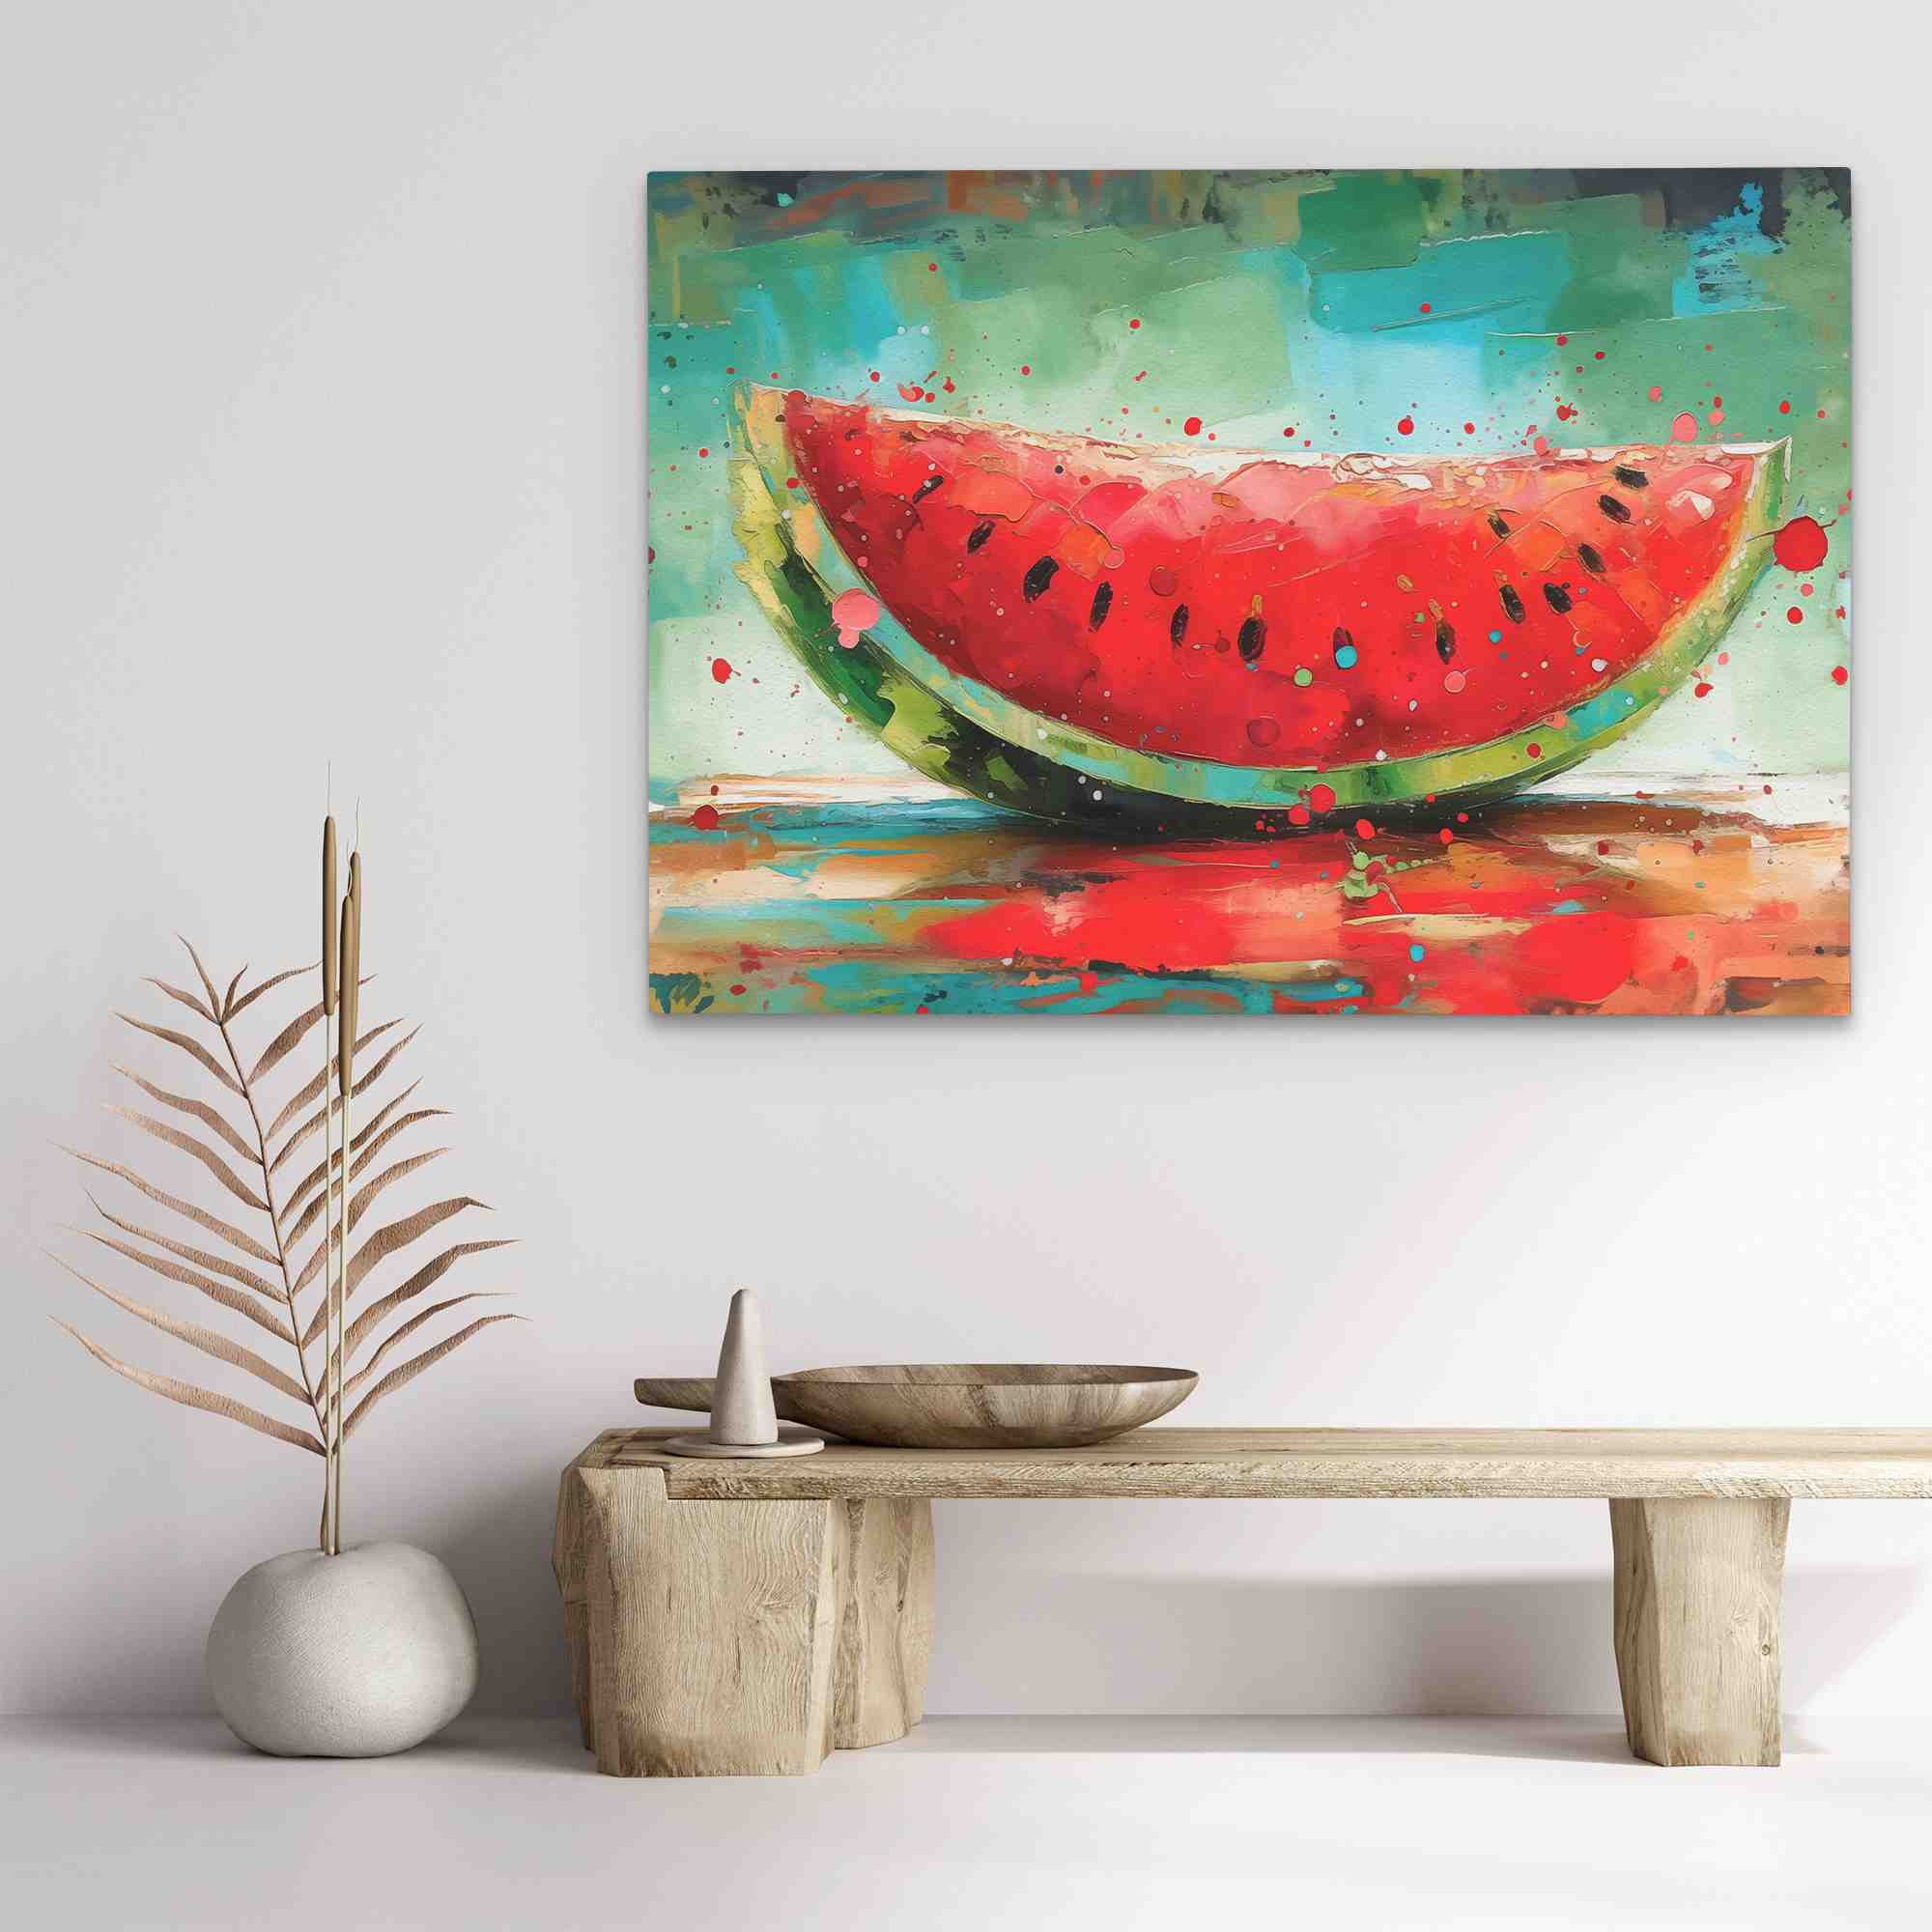 a painting of a slice of watermelon on a table